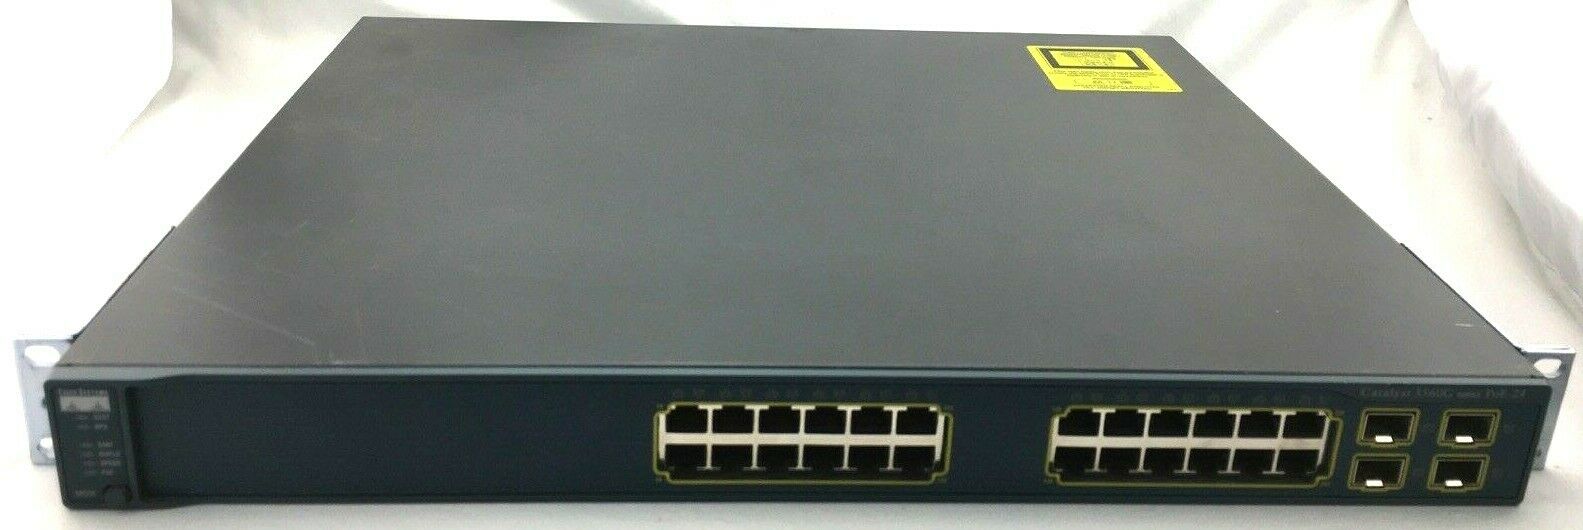 Cisco WS-C3560G-24PS-S V06 Catalyst 24-Port Managed Ethernet/Network Switch